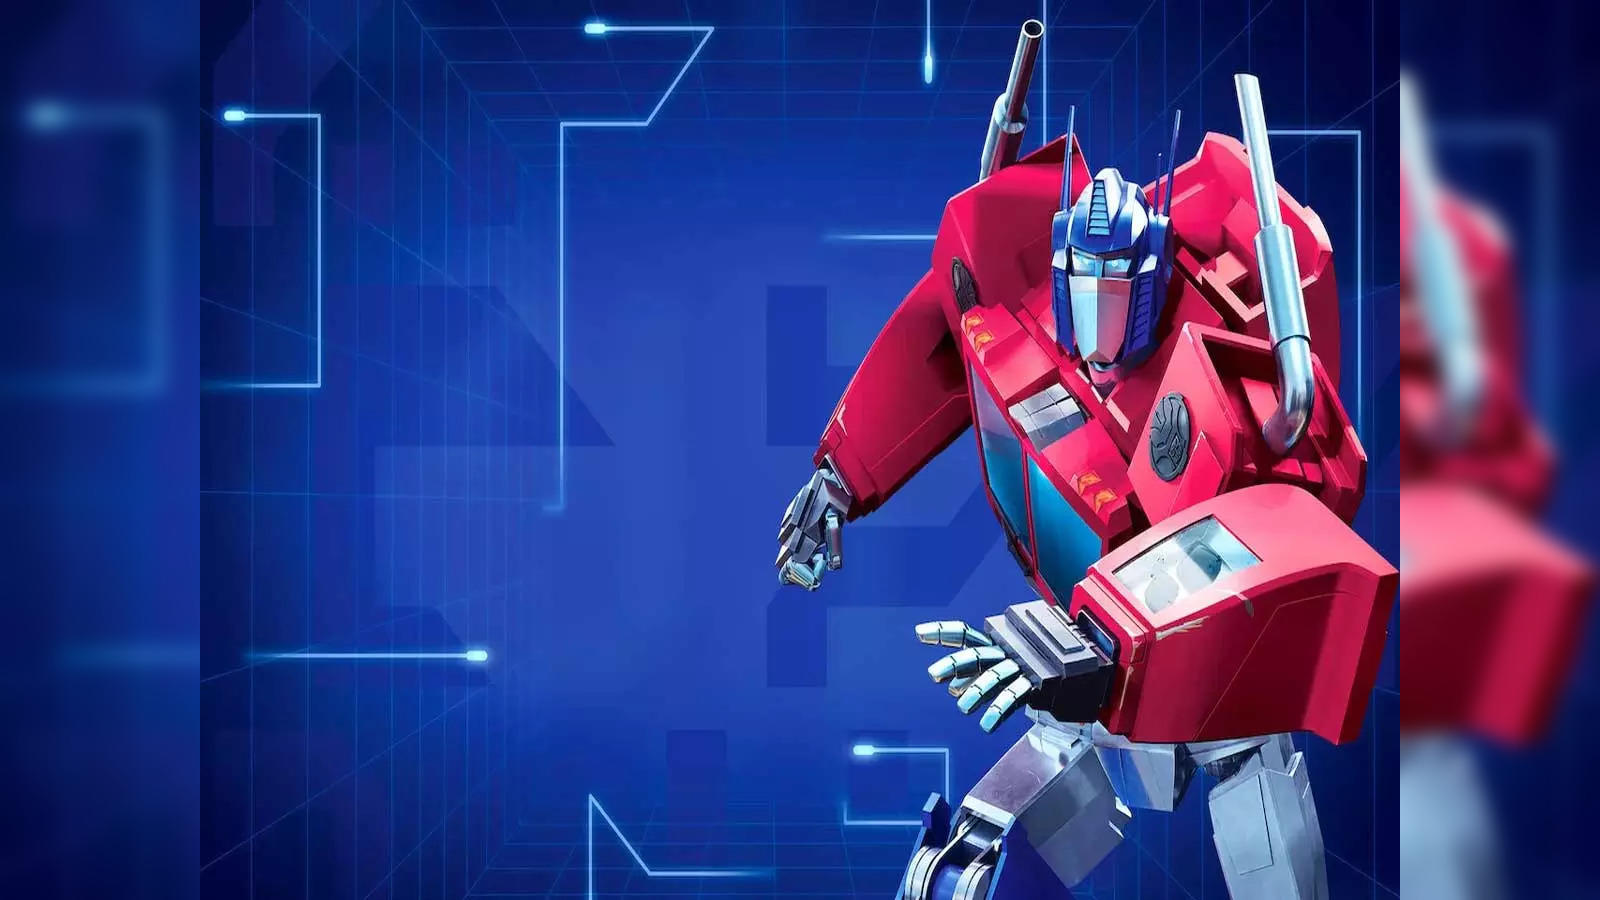 Transformers One Streaming Release Date Rumors